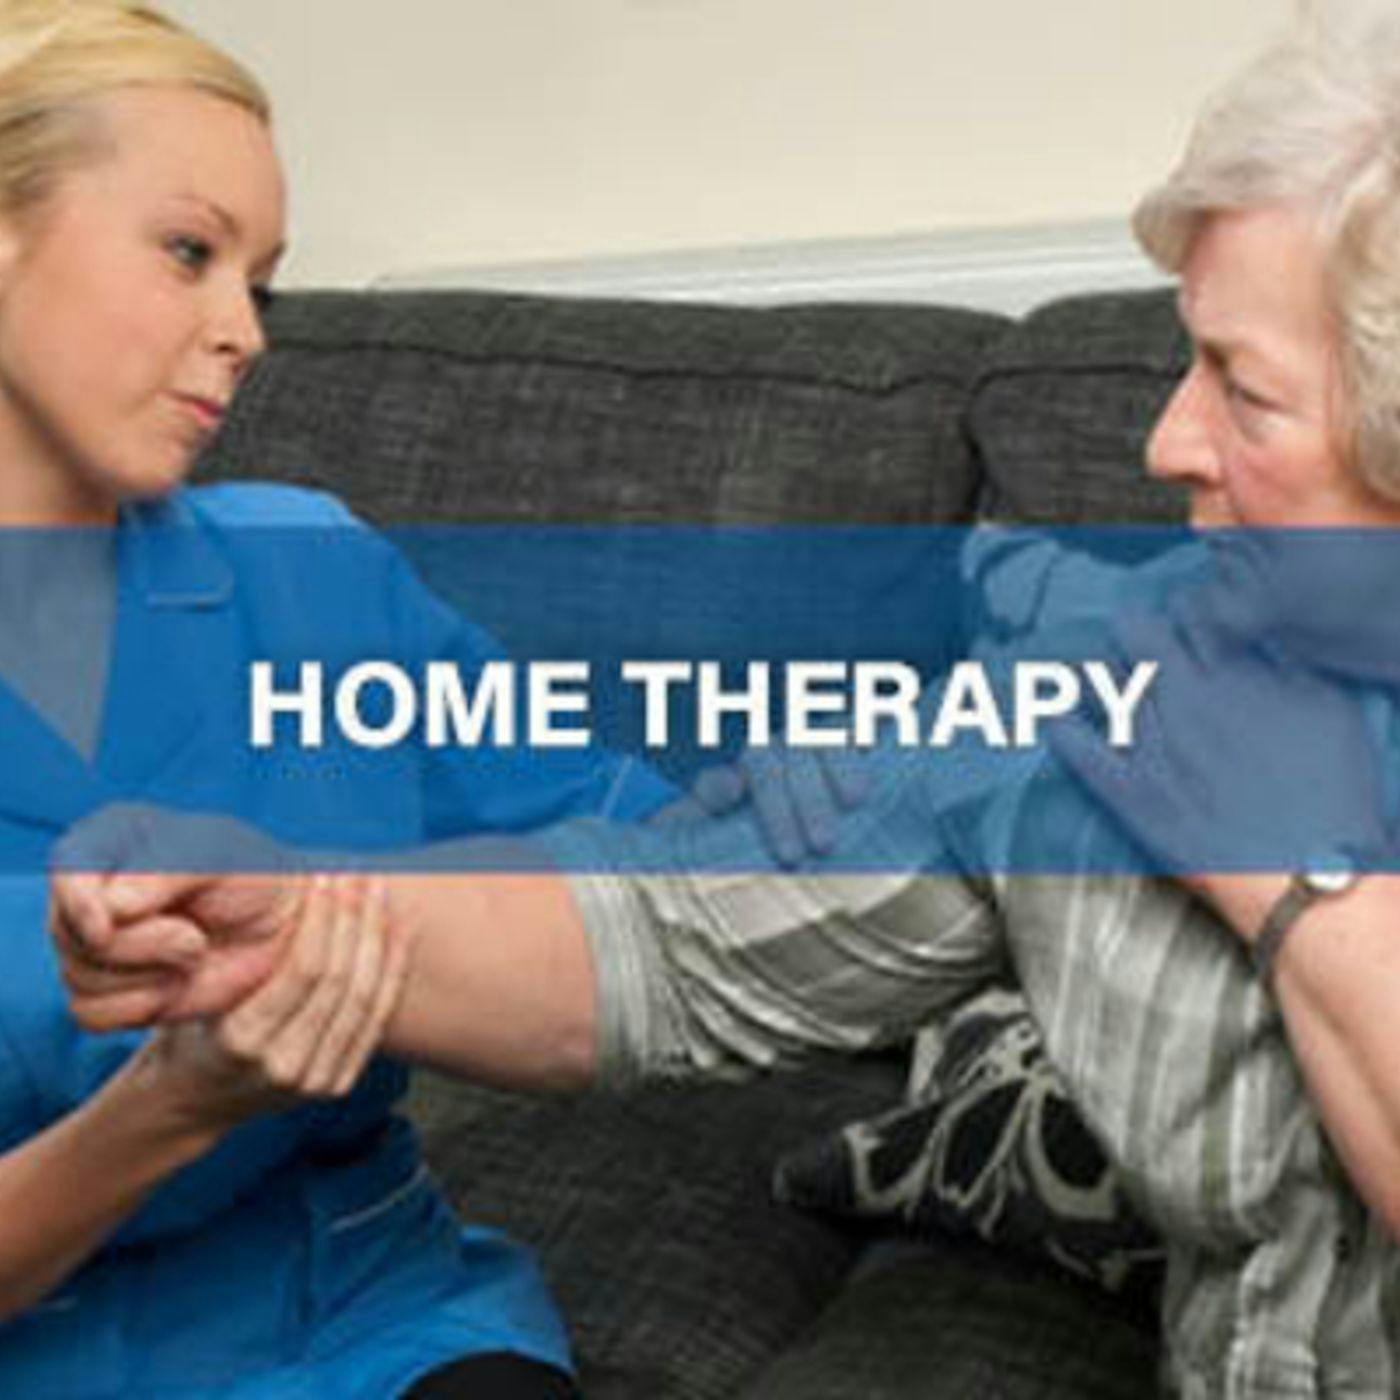 Ep. 2: Benefits of Physical Therapy at Home: by Athletico